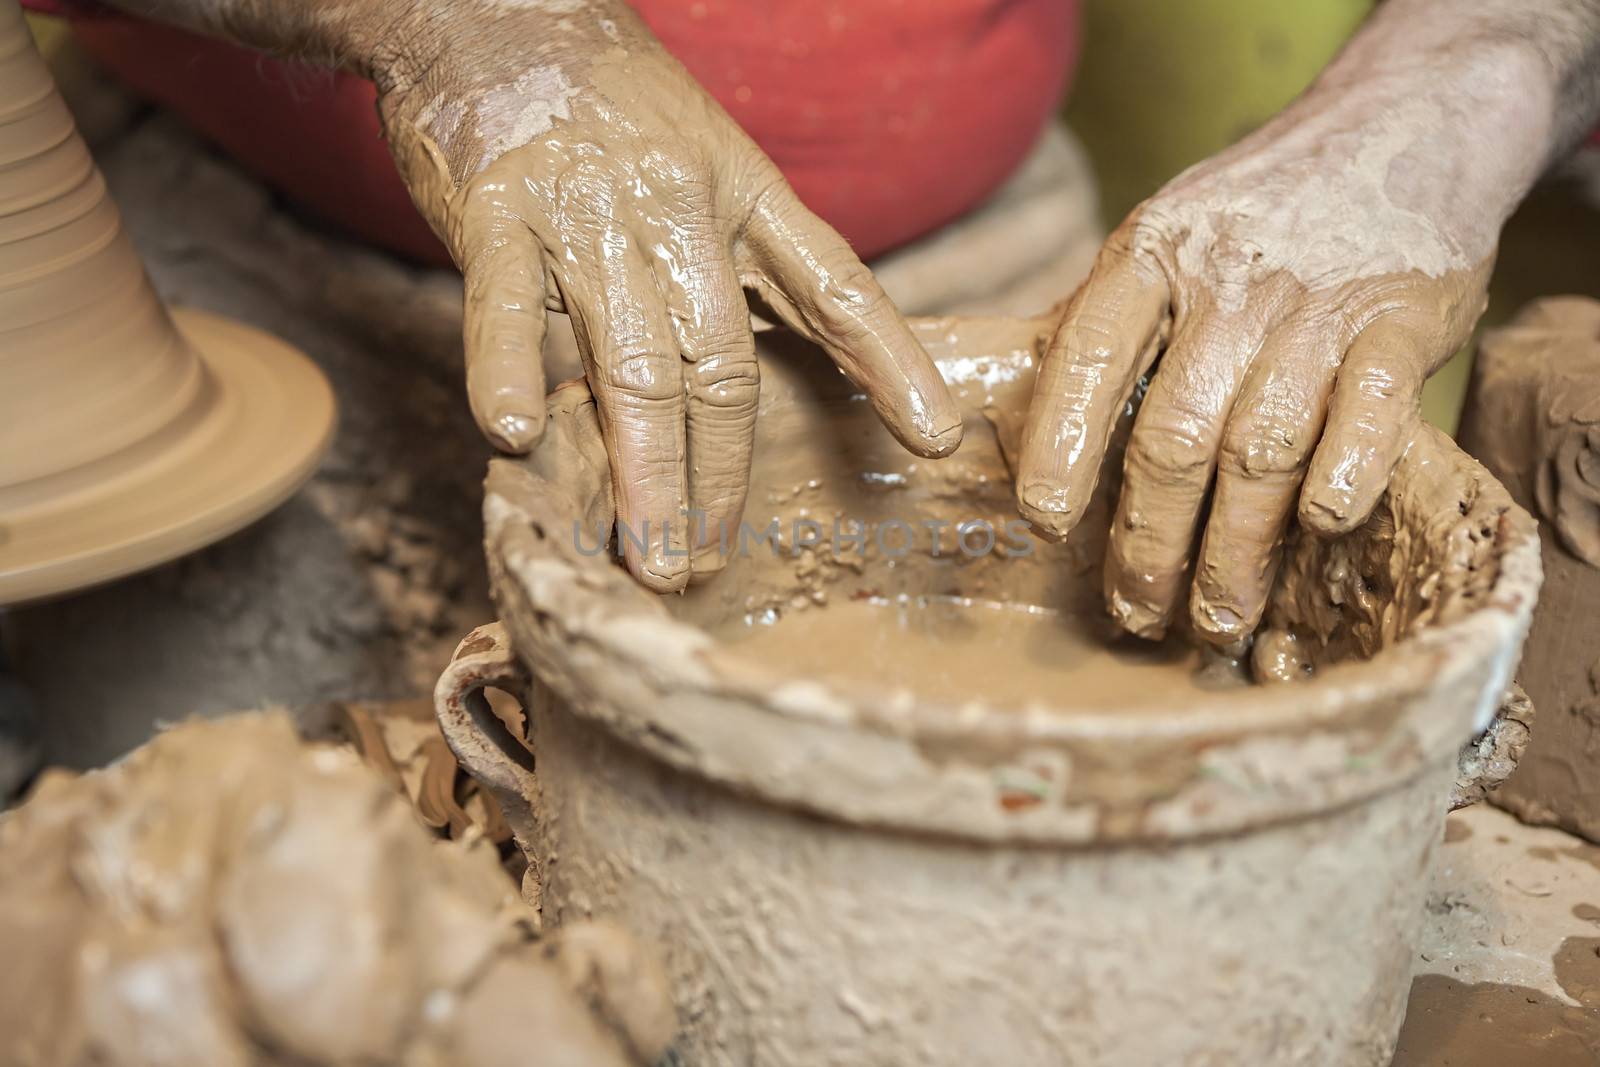 Detail of a potter's hands in a bucket of water by digicomphoto